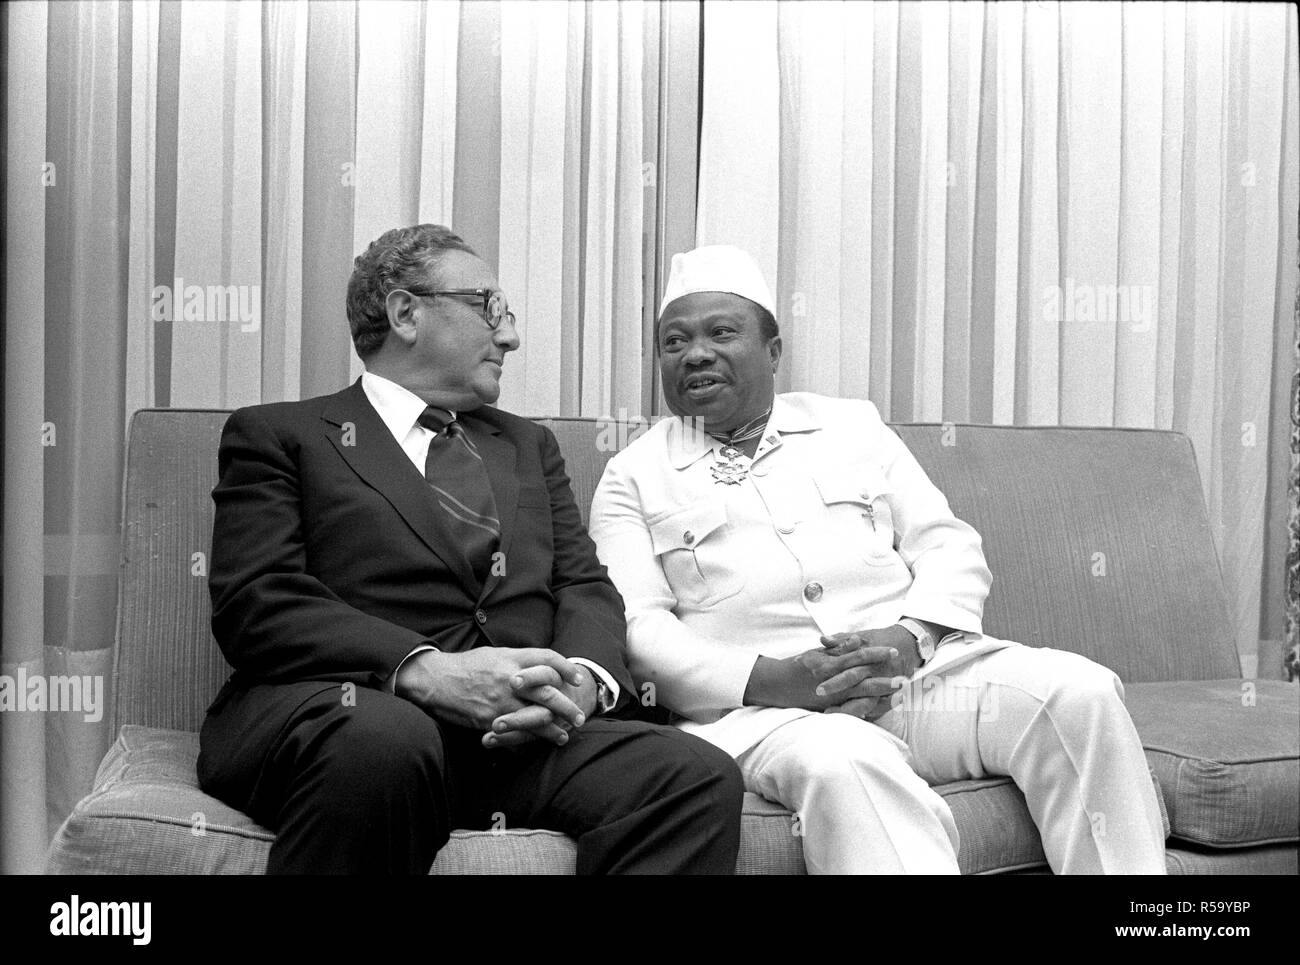 1976, April 30 – Executive Mansion – Monrovia, Liberia (Africa) – Henry Kissinger, William T. Tolbert Jr. – seated together on sofa, talking, laughing – Secretary of State Trip to Africa; Stock Photo